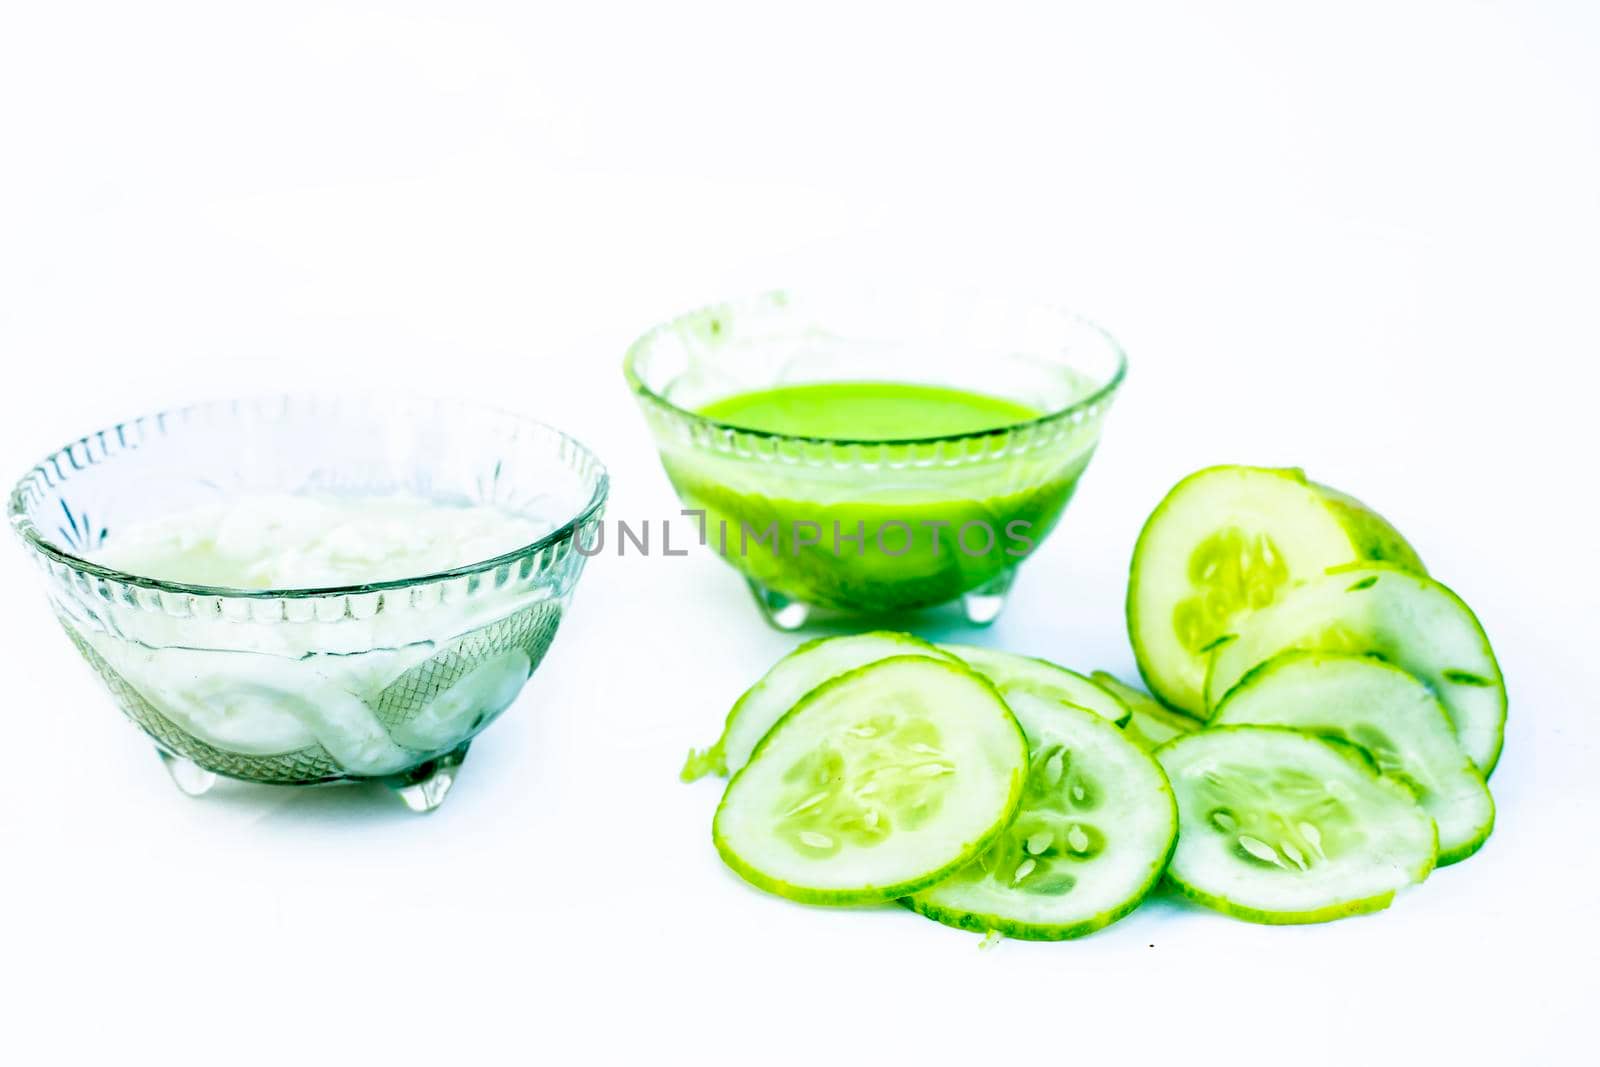 Cucumber face pack isolated on white i.e. Cucumber pulp well mixed with dahi or yogurt in a glass bowl and entire raw ingredients present on the surface.Used to cure acne prone skin.